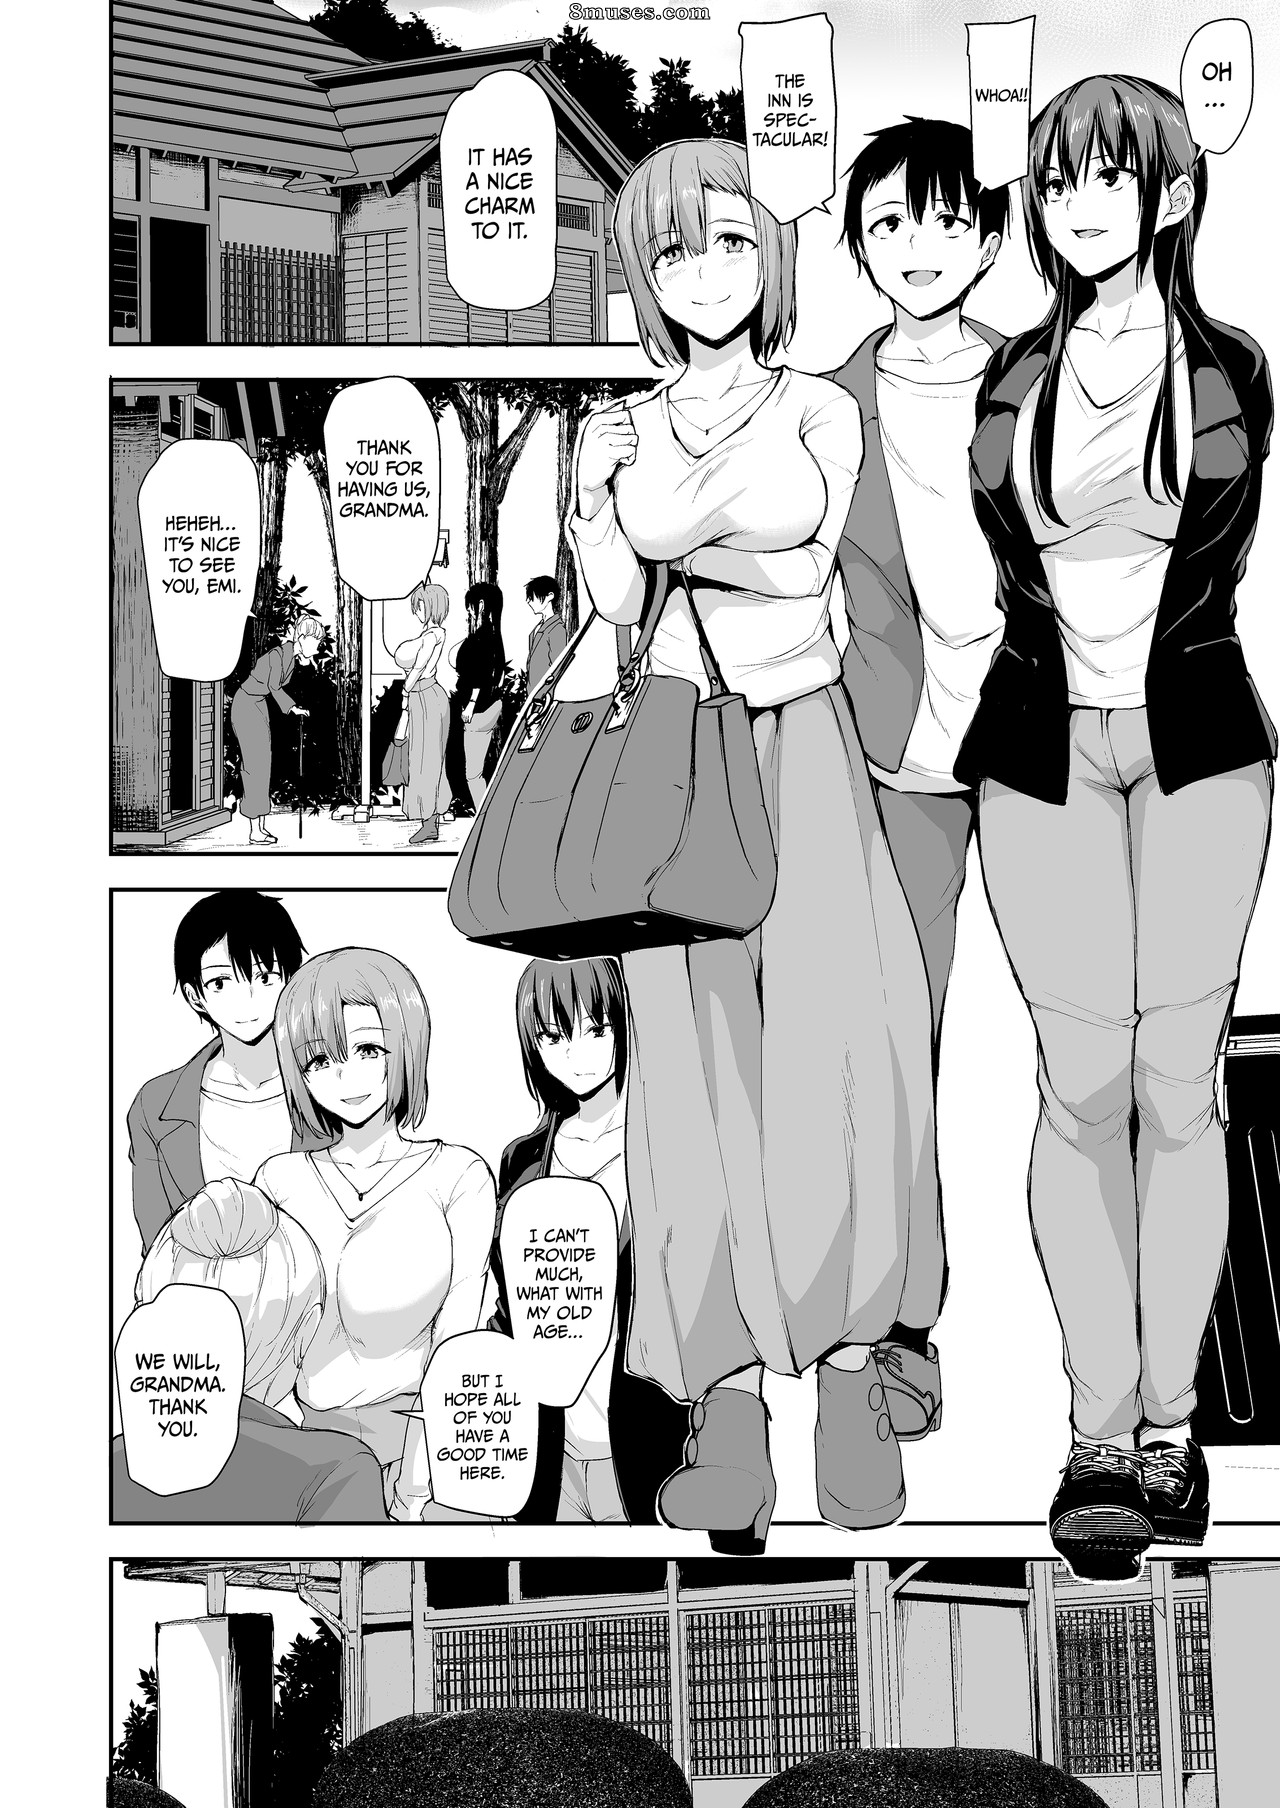 Page 5 Fakku-Comics/SHIMA-PAN-Tachibana-Omina/I-Cant-Get-it-Up-Without-Two -Pairs-of-Big-Breasts-So-My-Wife-Brought-Her-Friend-2 8muses picture photo